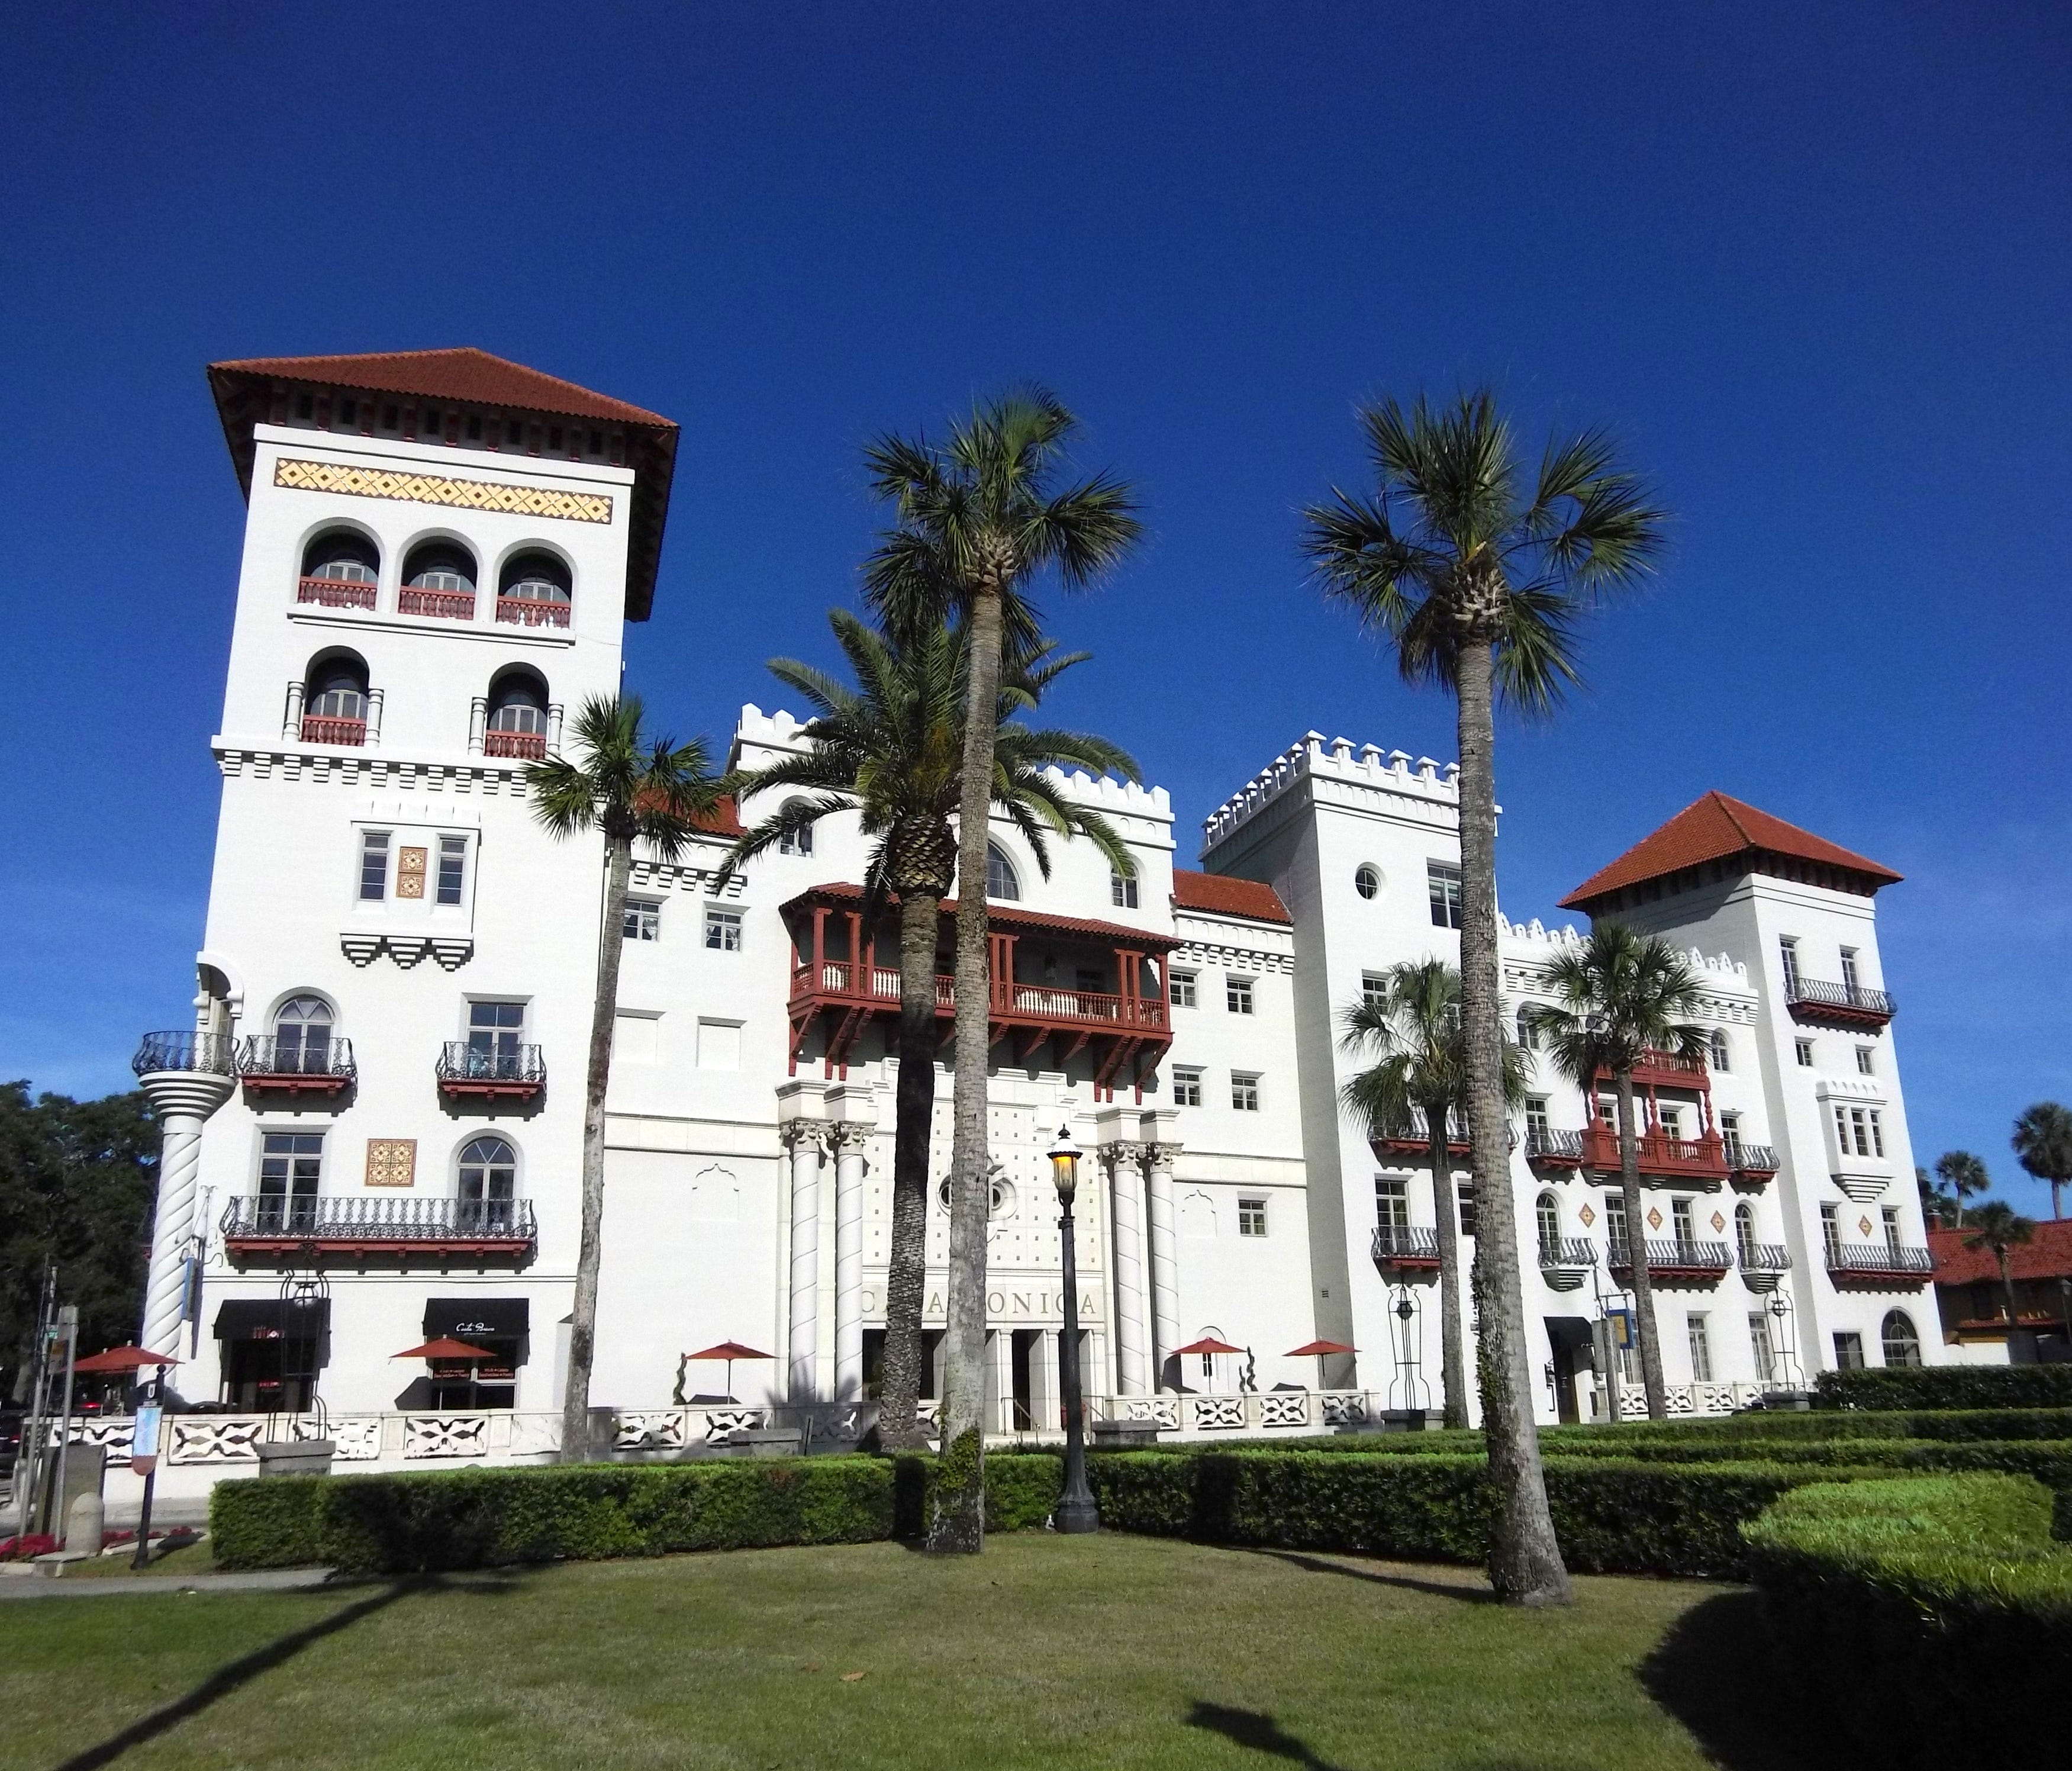 Casa Monica Resort & Spa sits in the heart of St. Augustine's historic center.